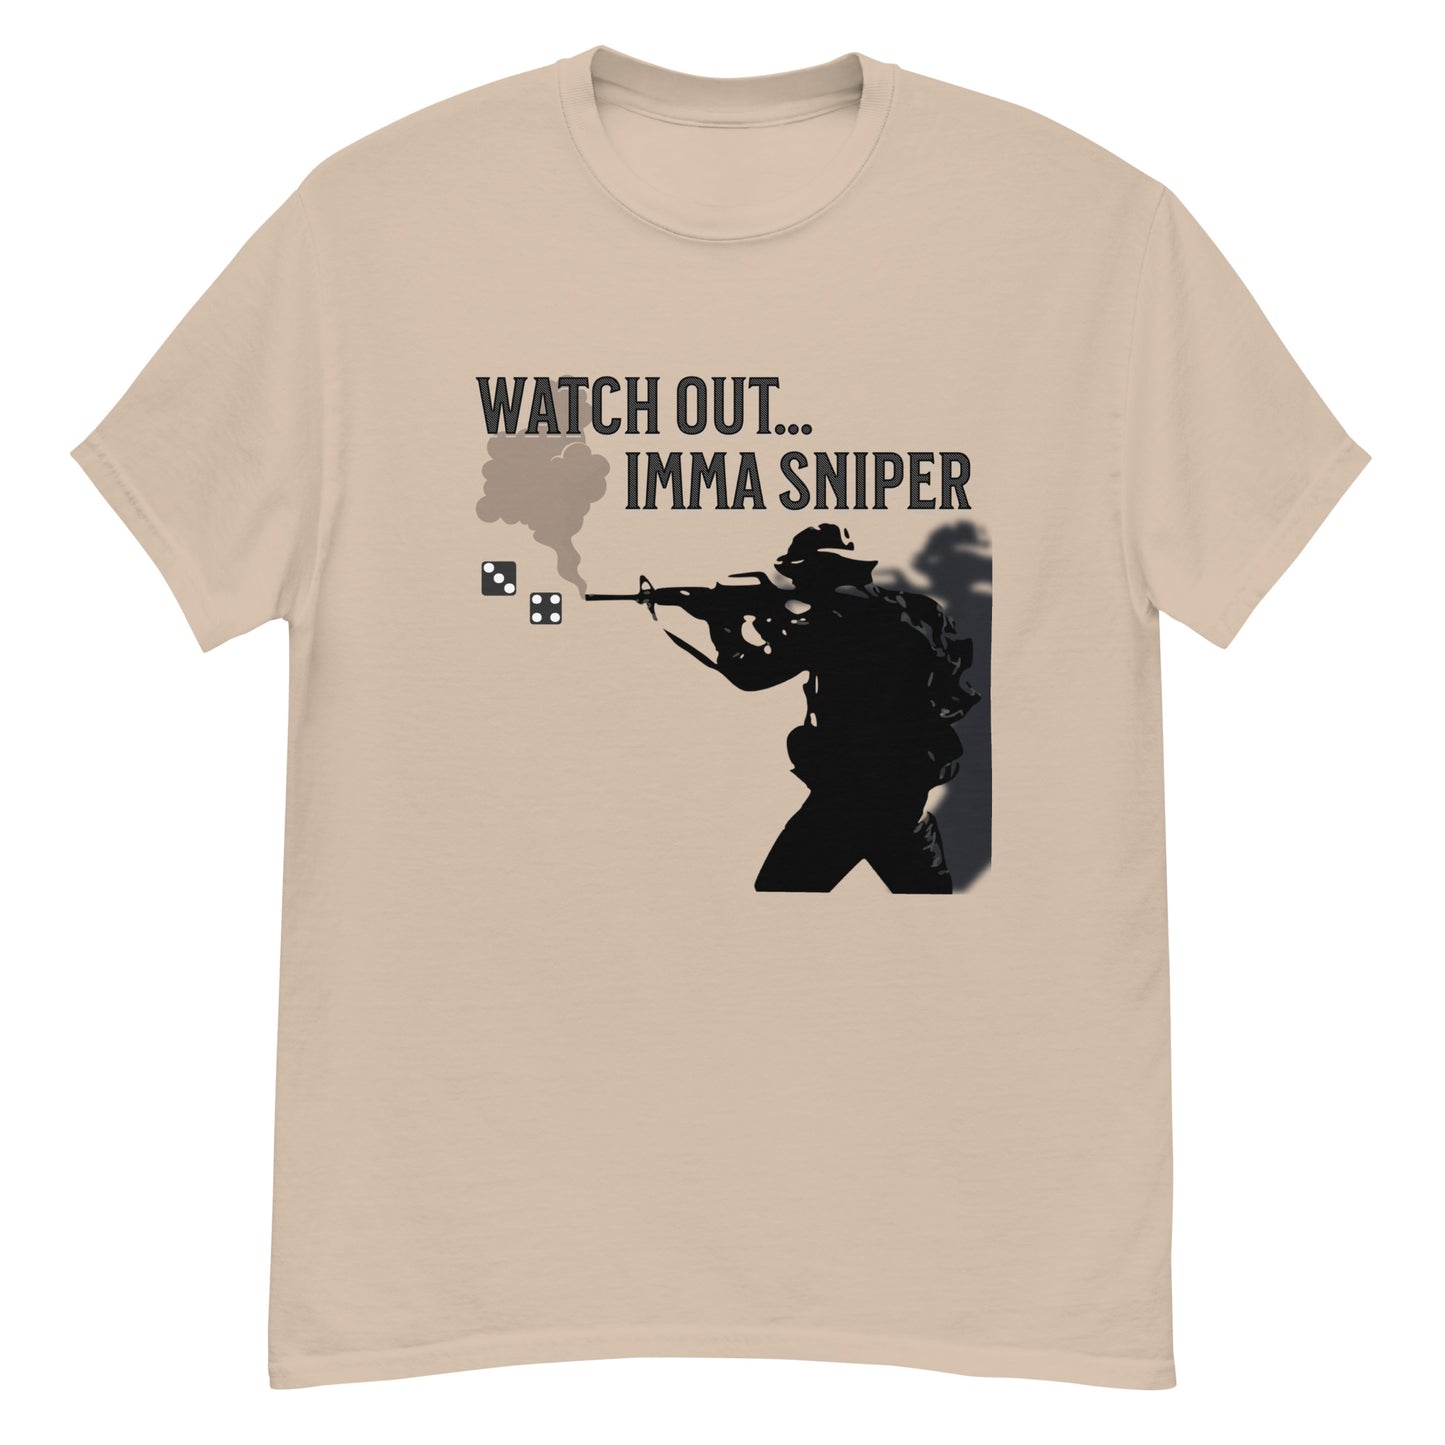 Watch Out... Imma Sniper